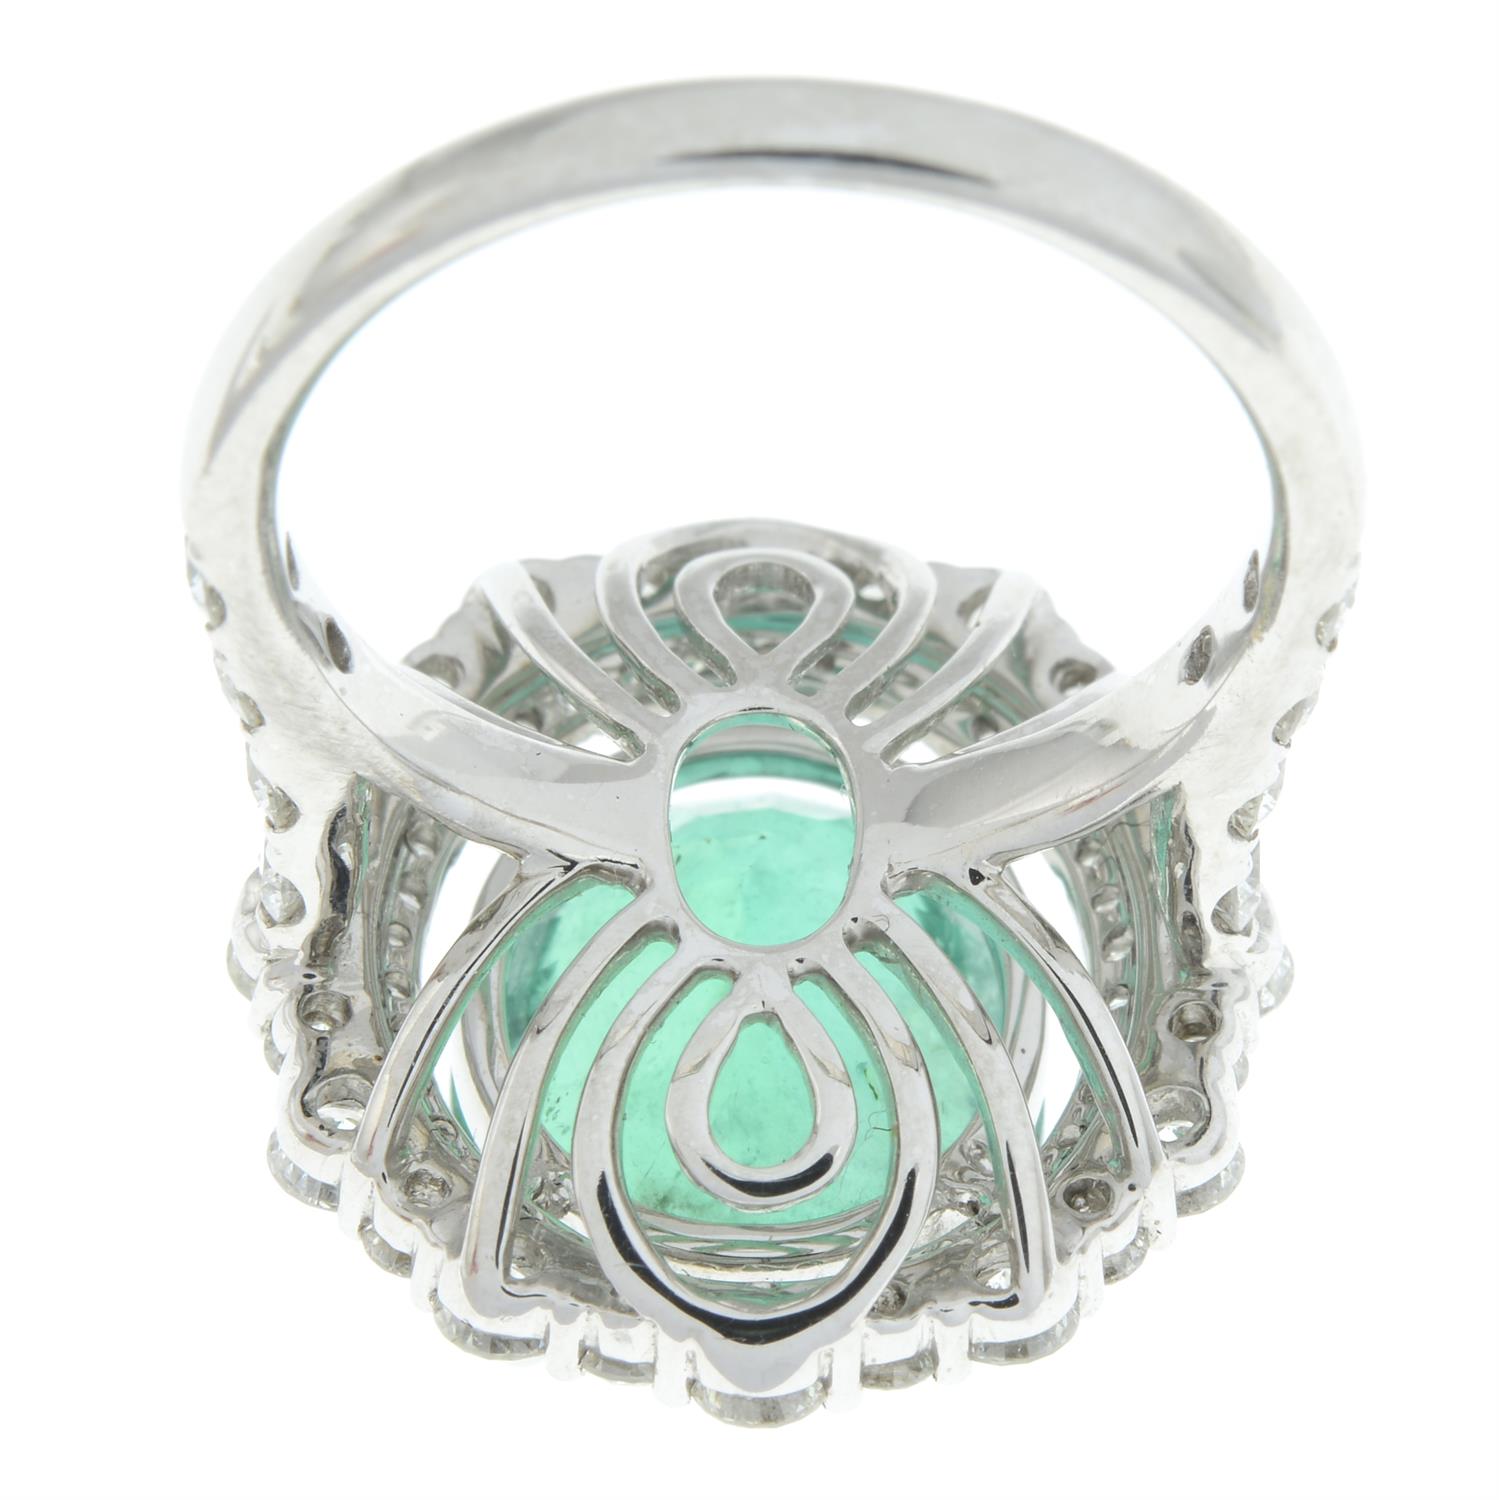 Emerald and diamond ring - Image 3 of 6